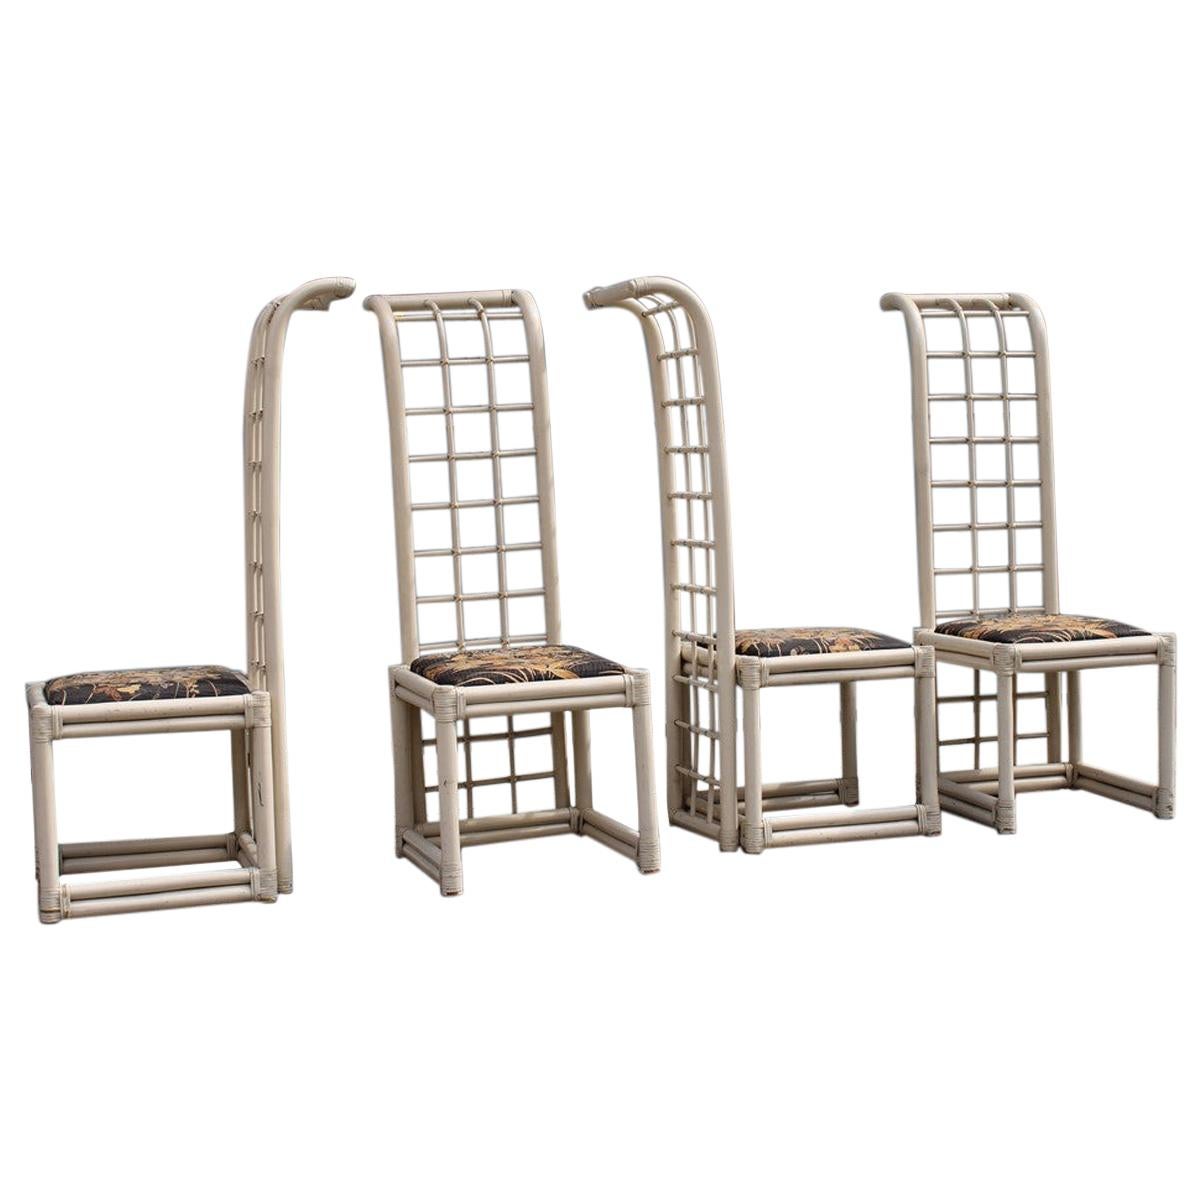 Vivai del Sud Chairs High Back in White Bamboo Italian Design, 1970 For Sale